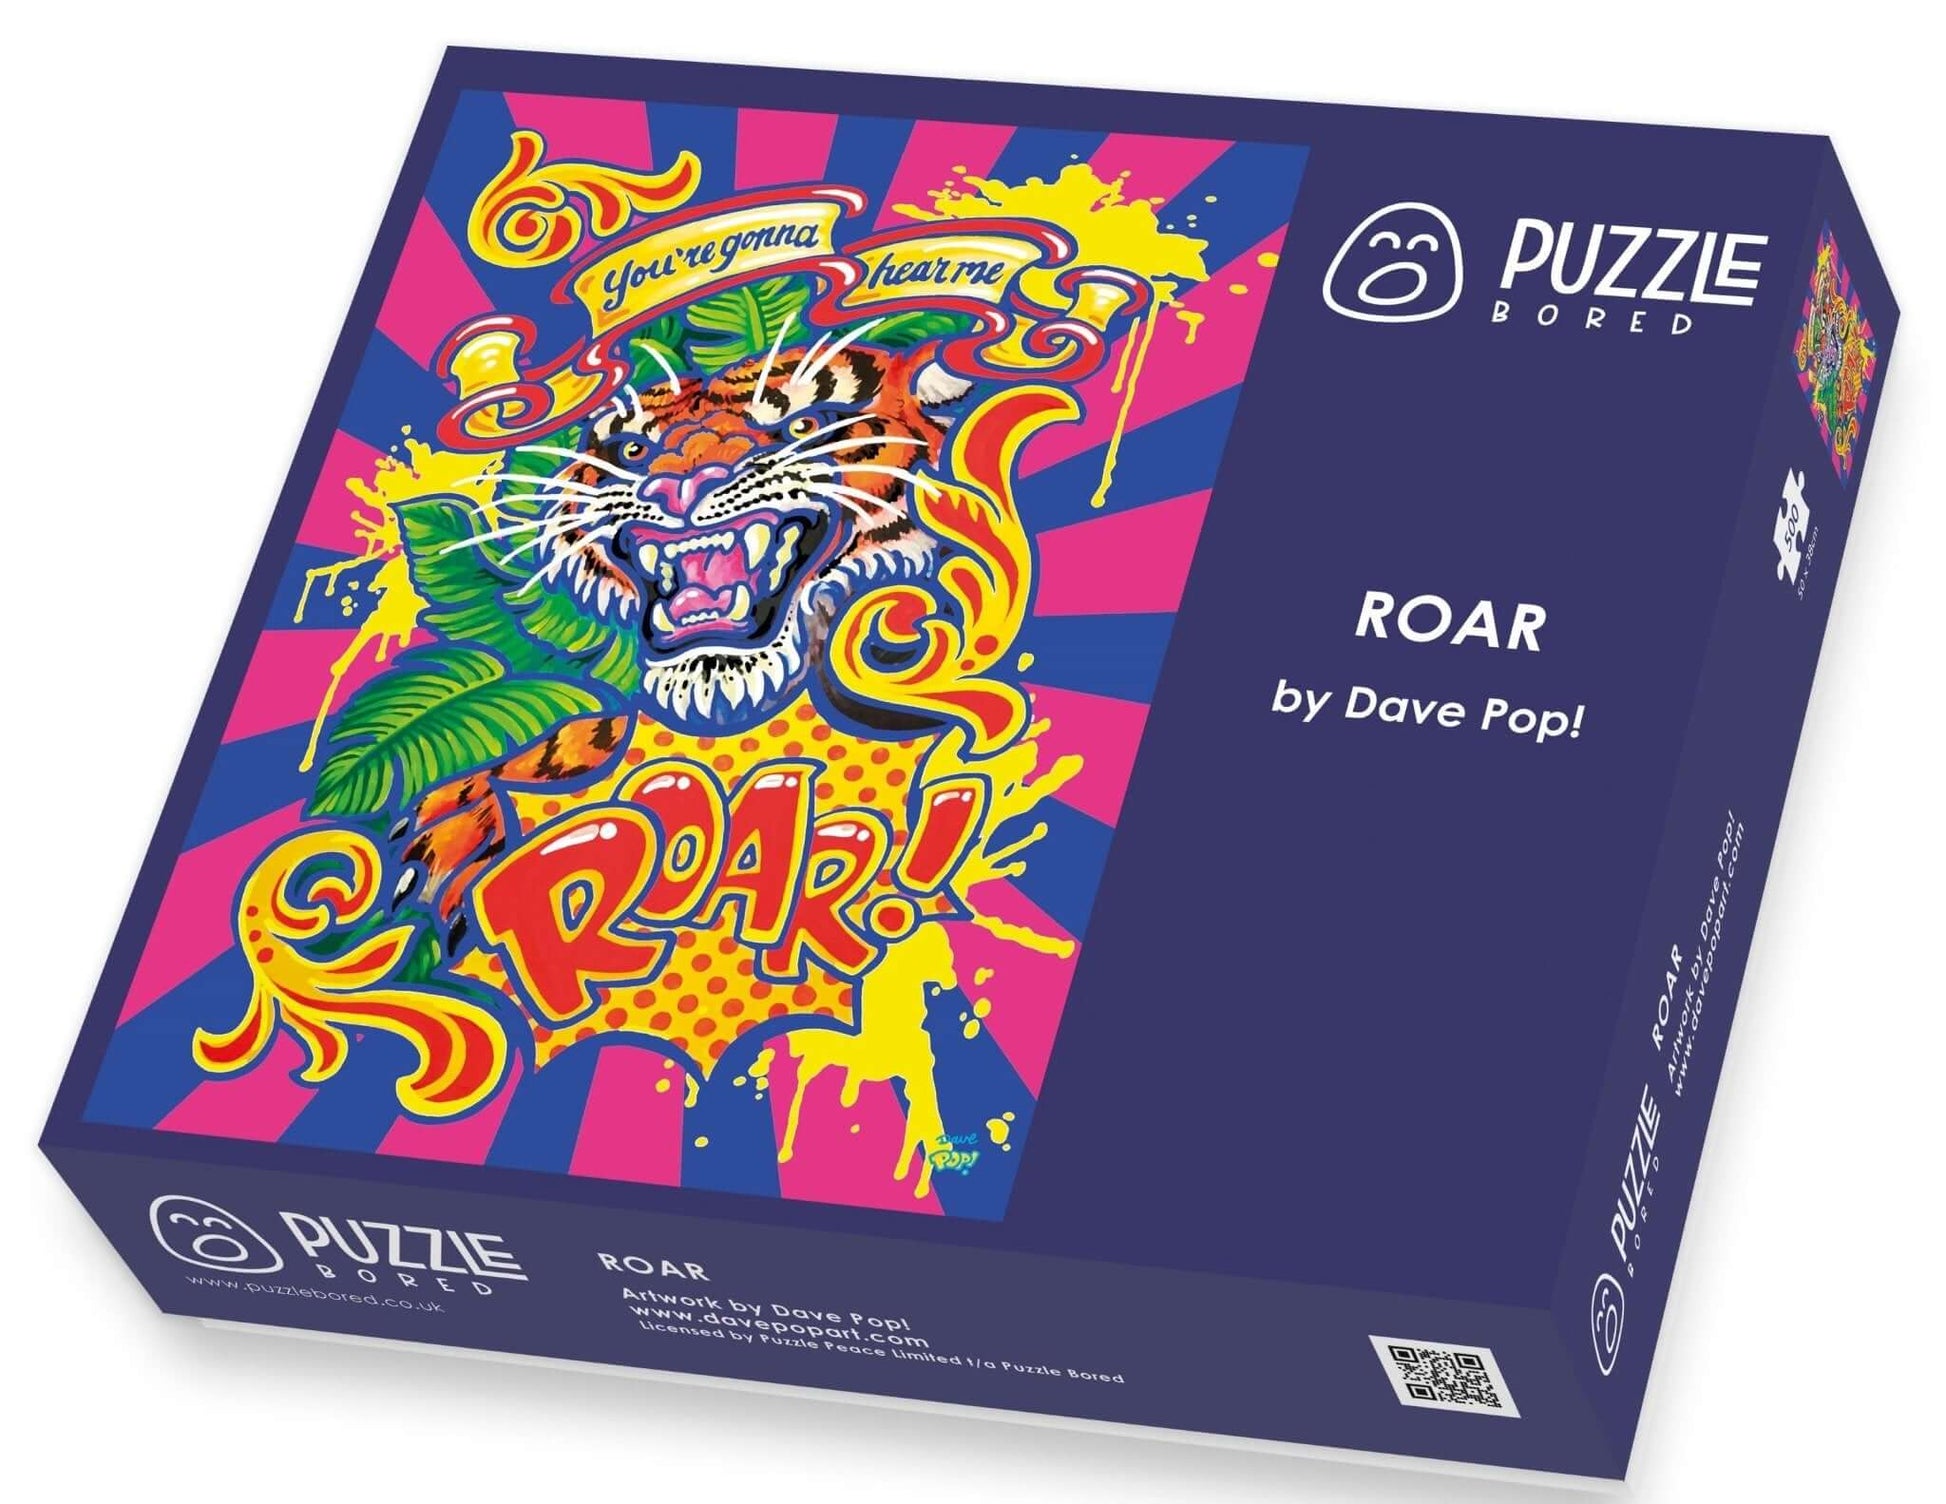 Roar by Dave Pop! - Puzzle Bored